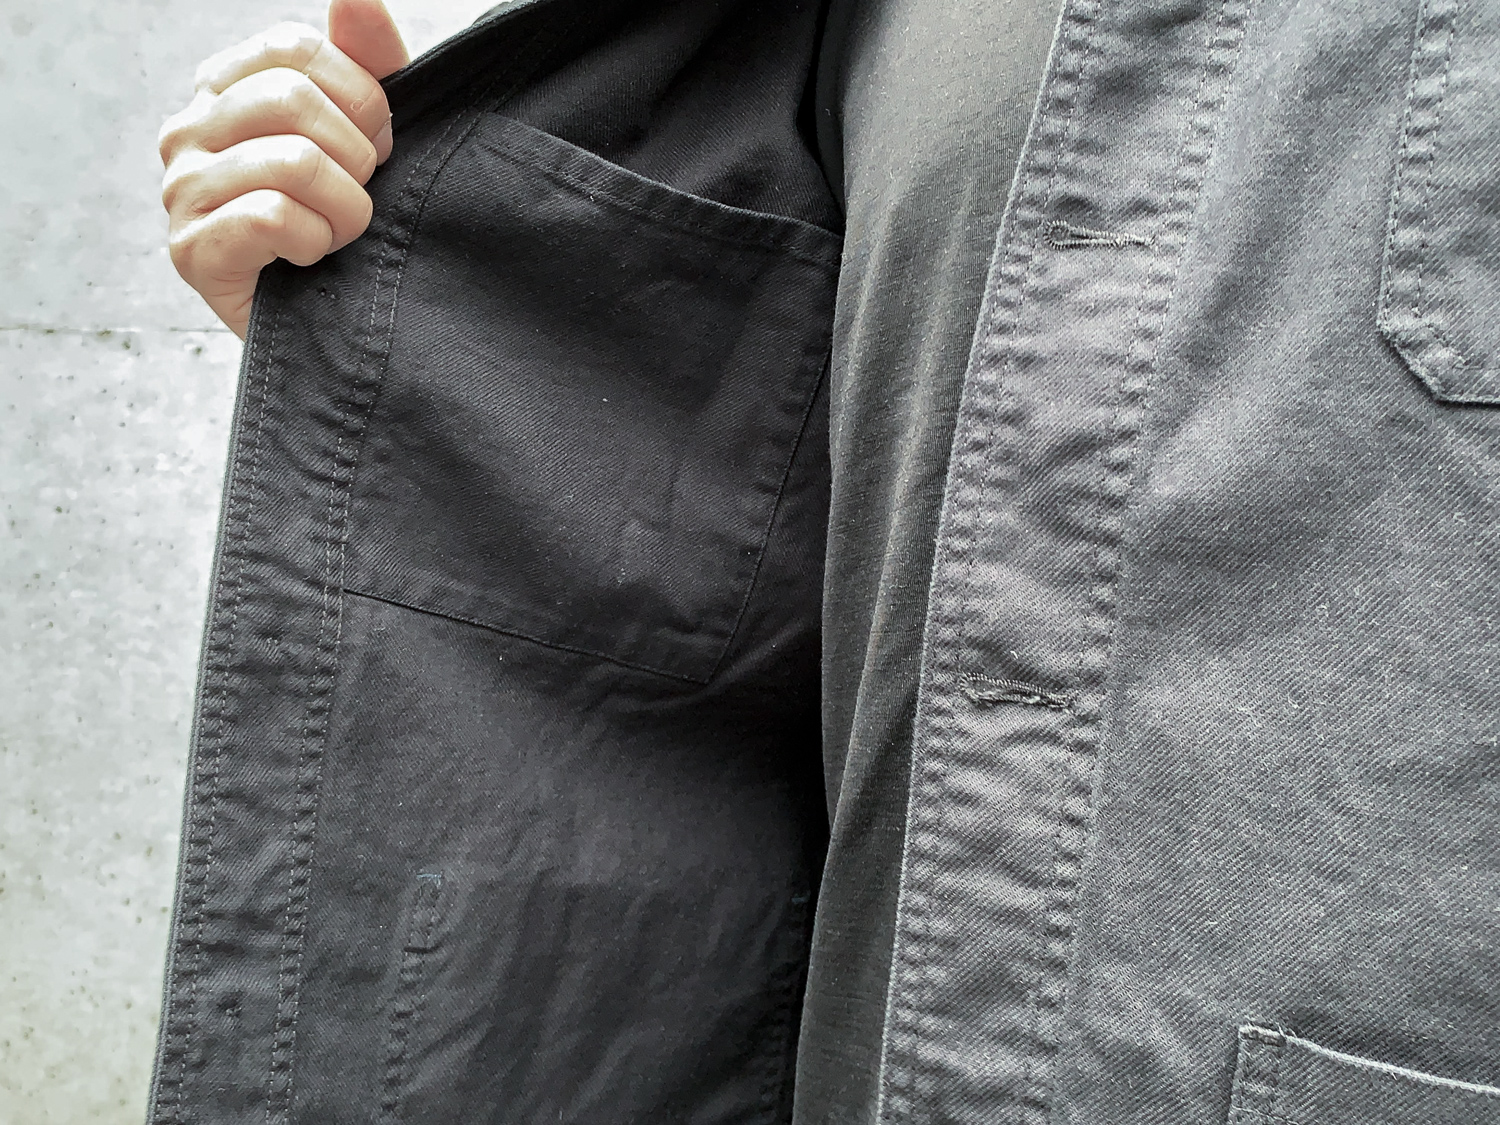 The unapologetically non-technical Vetra workwear jacket.